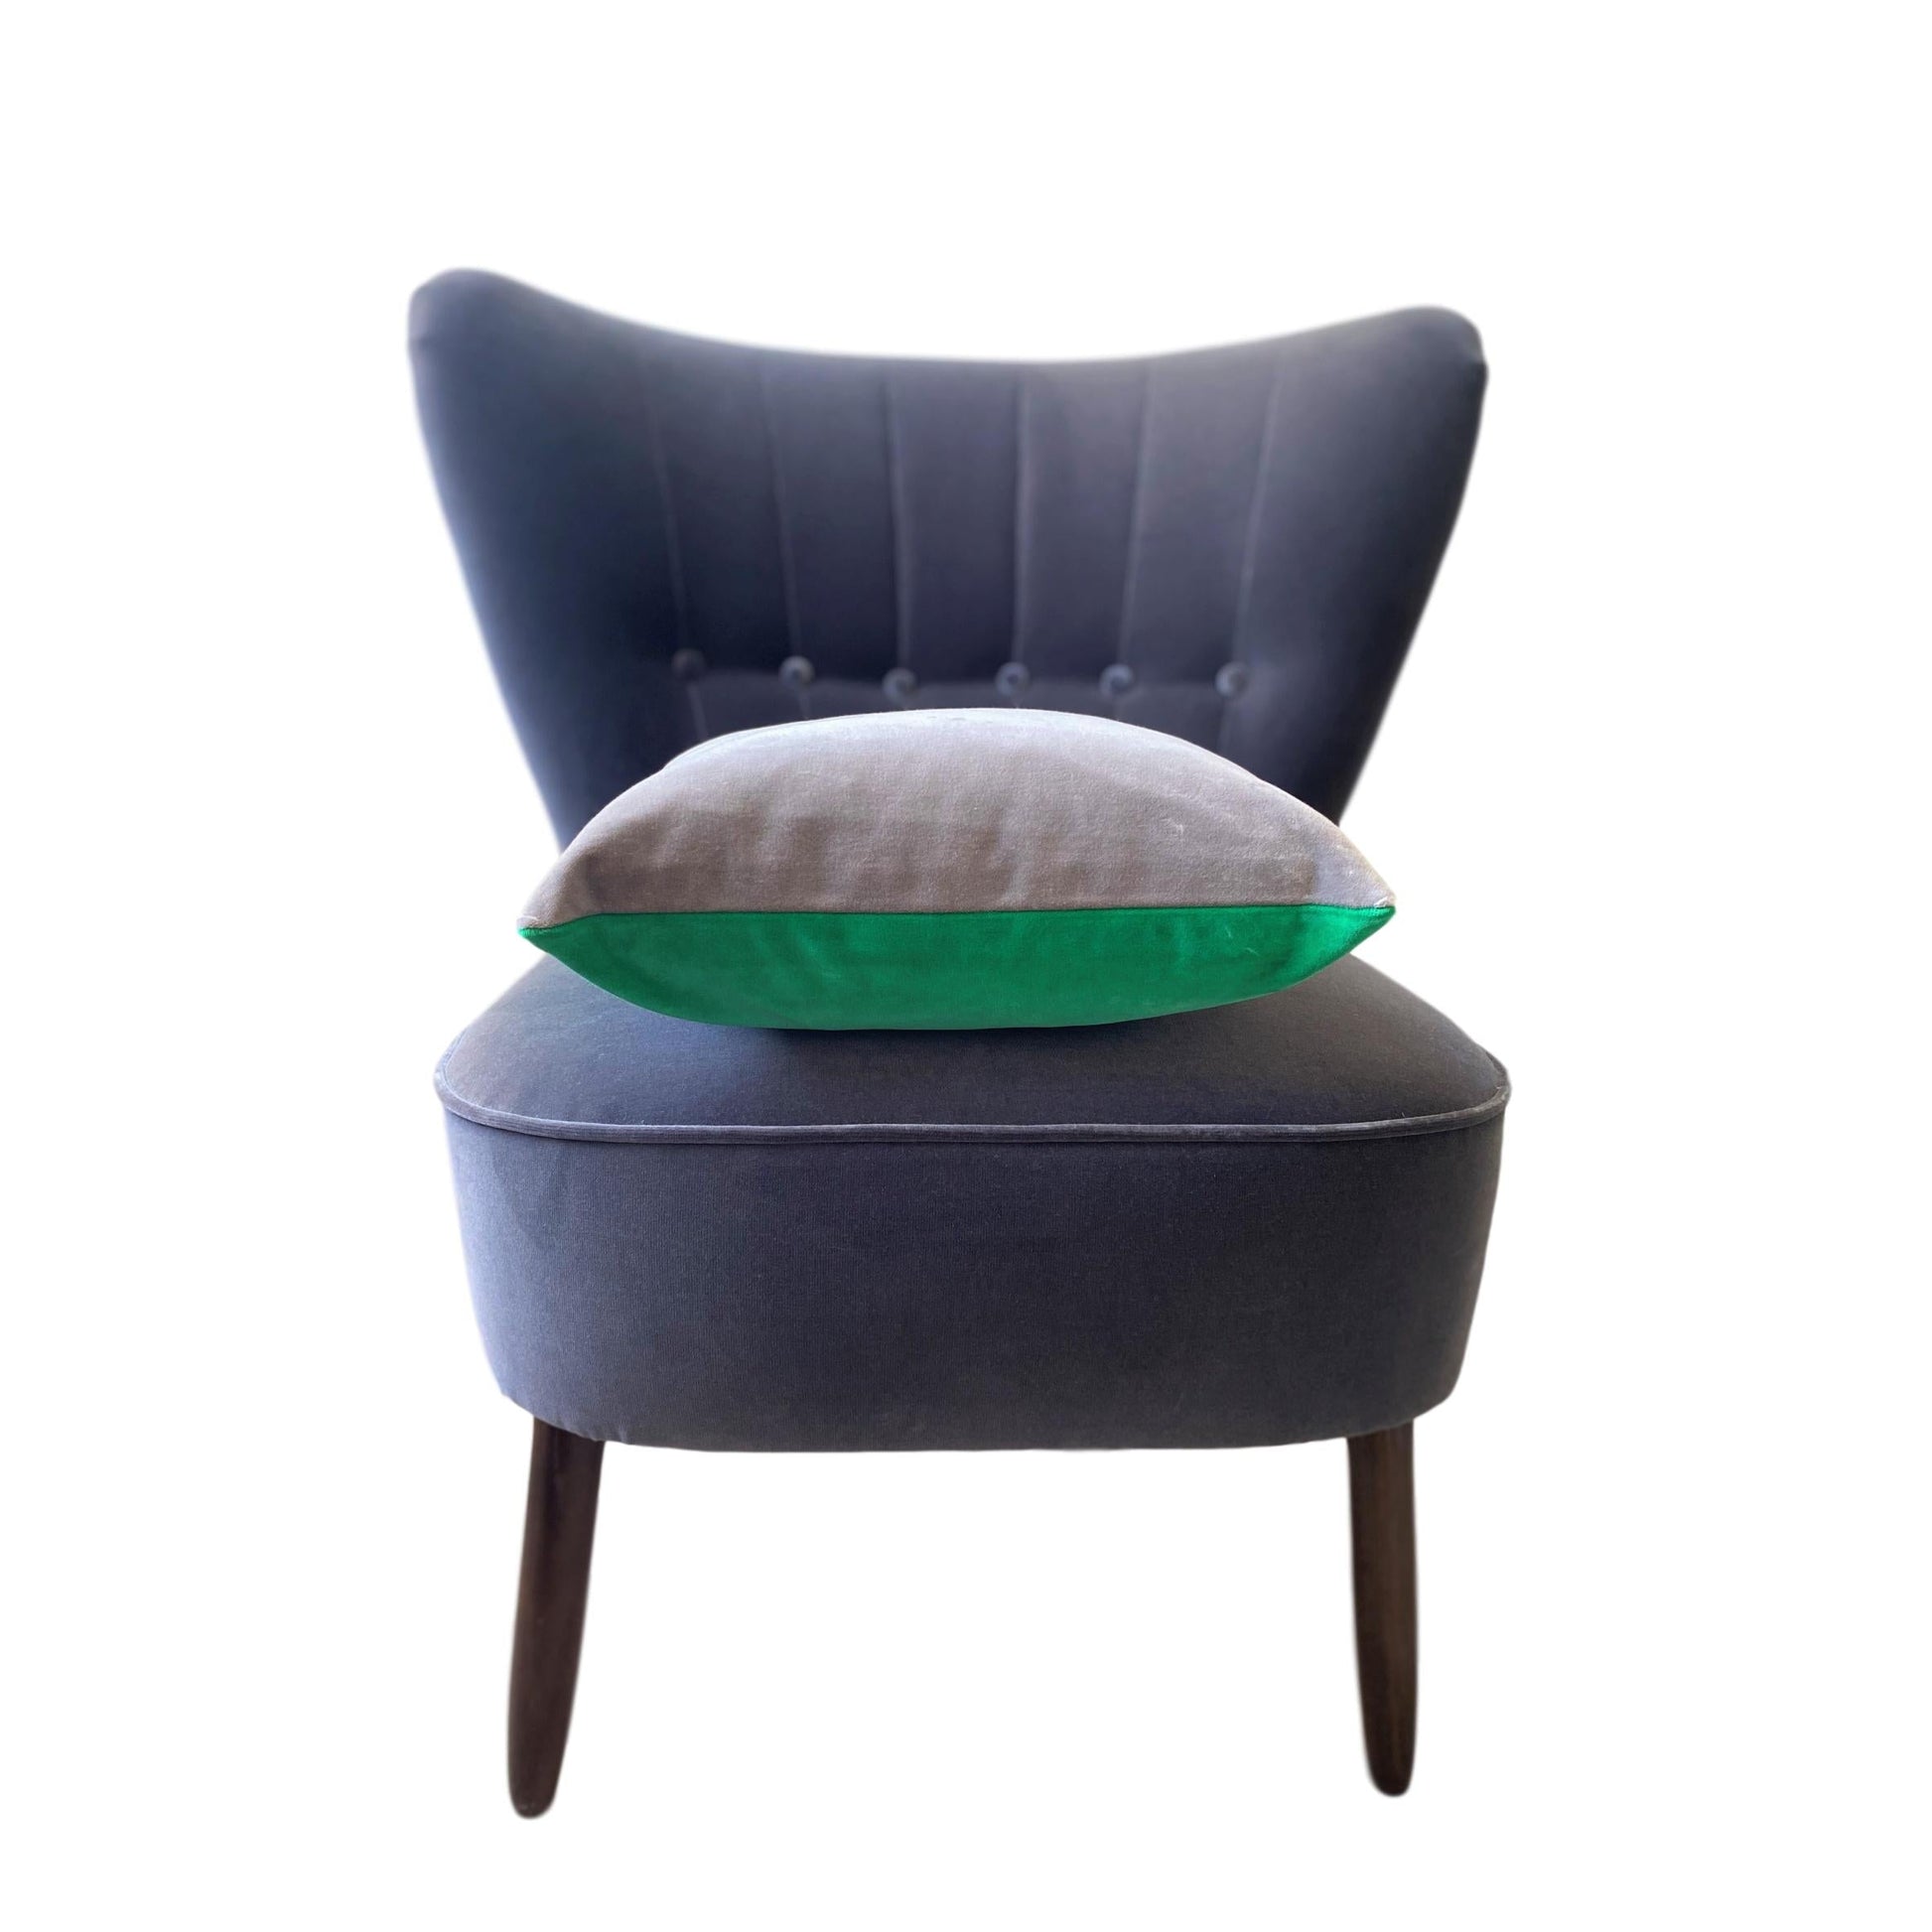 silver grey velvet cushion cover with emerald green by Luxe 39